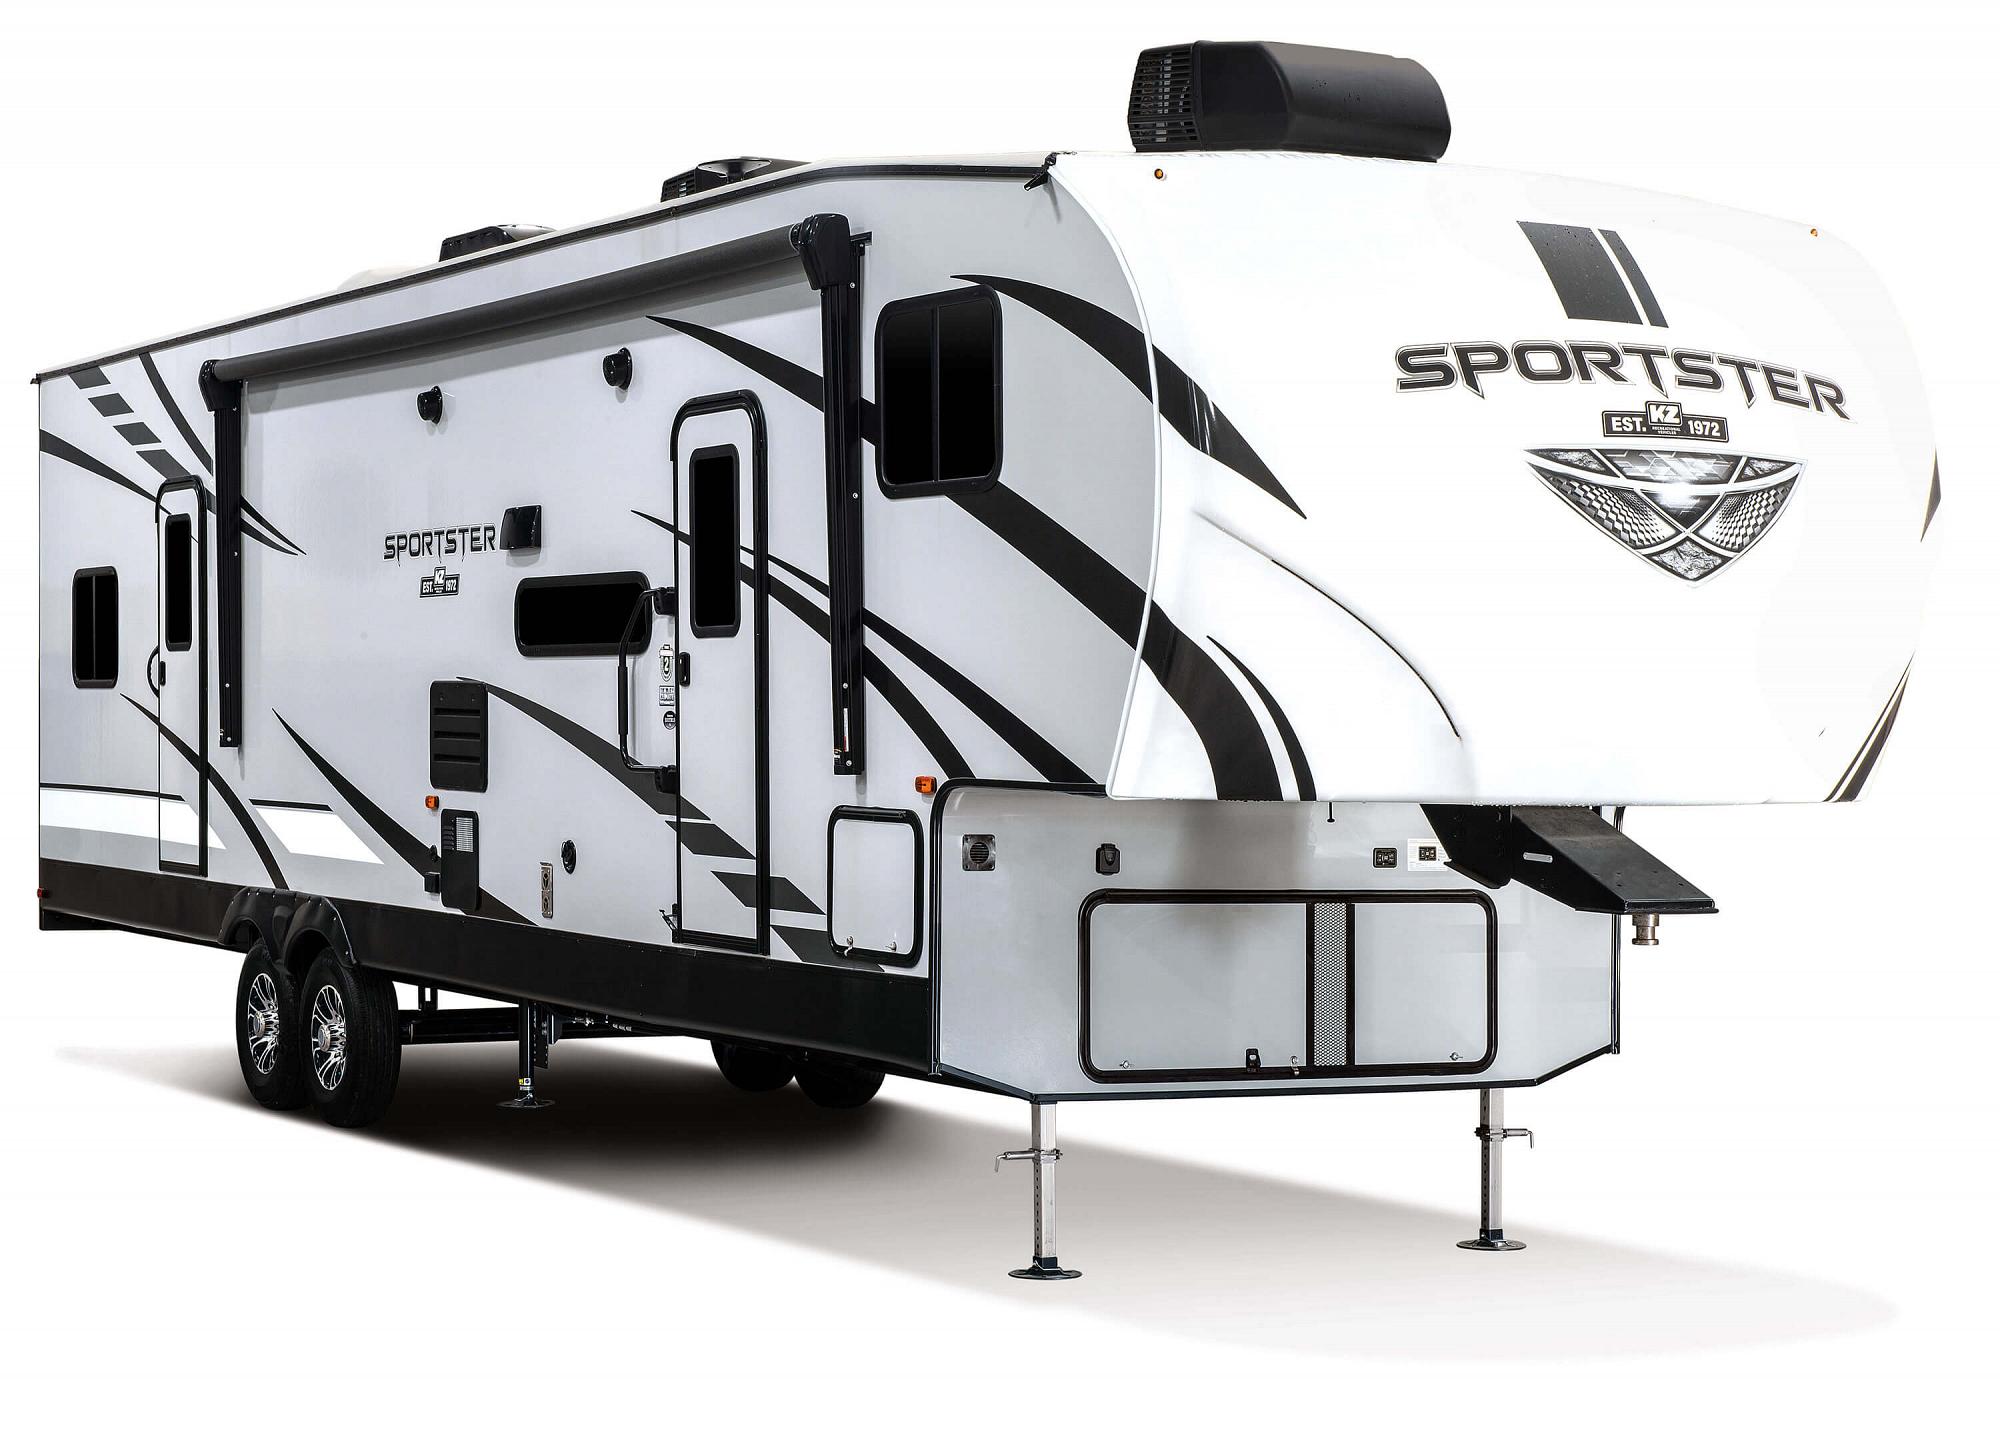 KZs Sportster Fifth Wheel Serves Overgrown Families With Lots of Bang for Little Buck - autoevolution